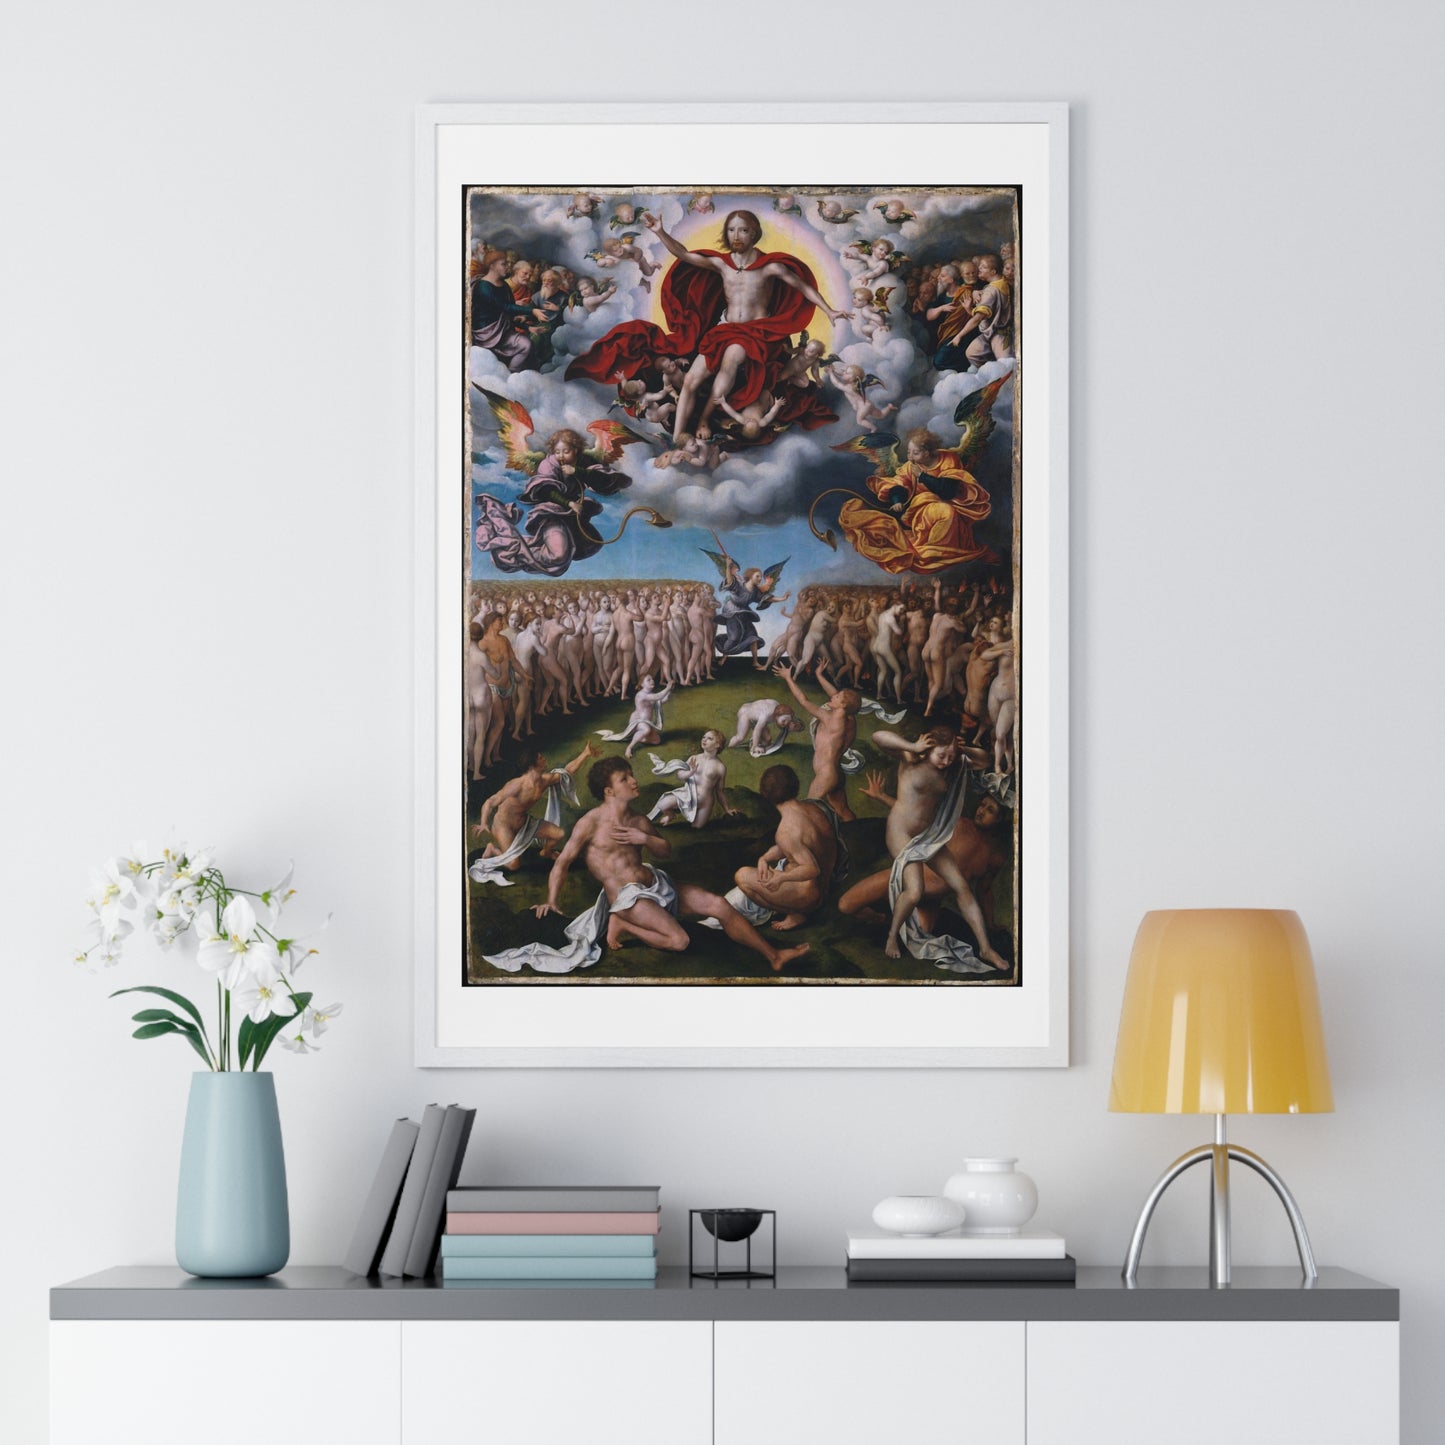 The Last Judgment (1525-1530) by Joos van Cleve, from the Original, Framed Art Print